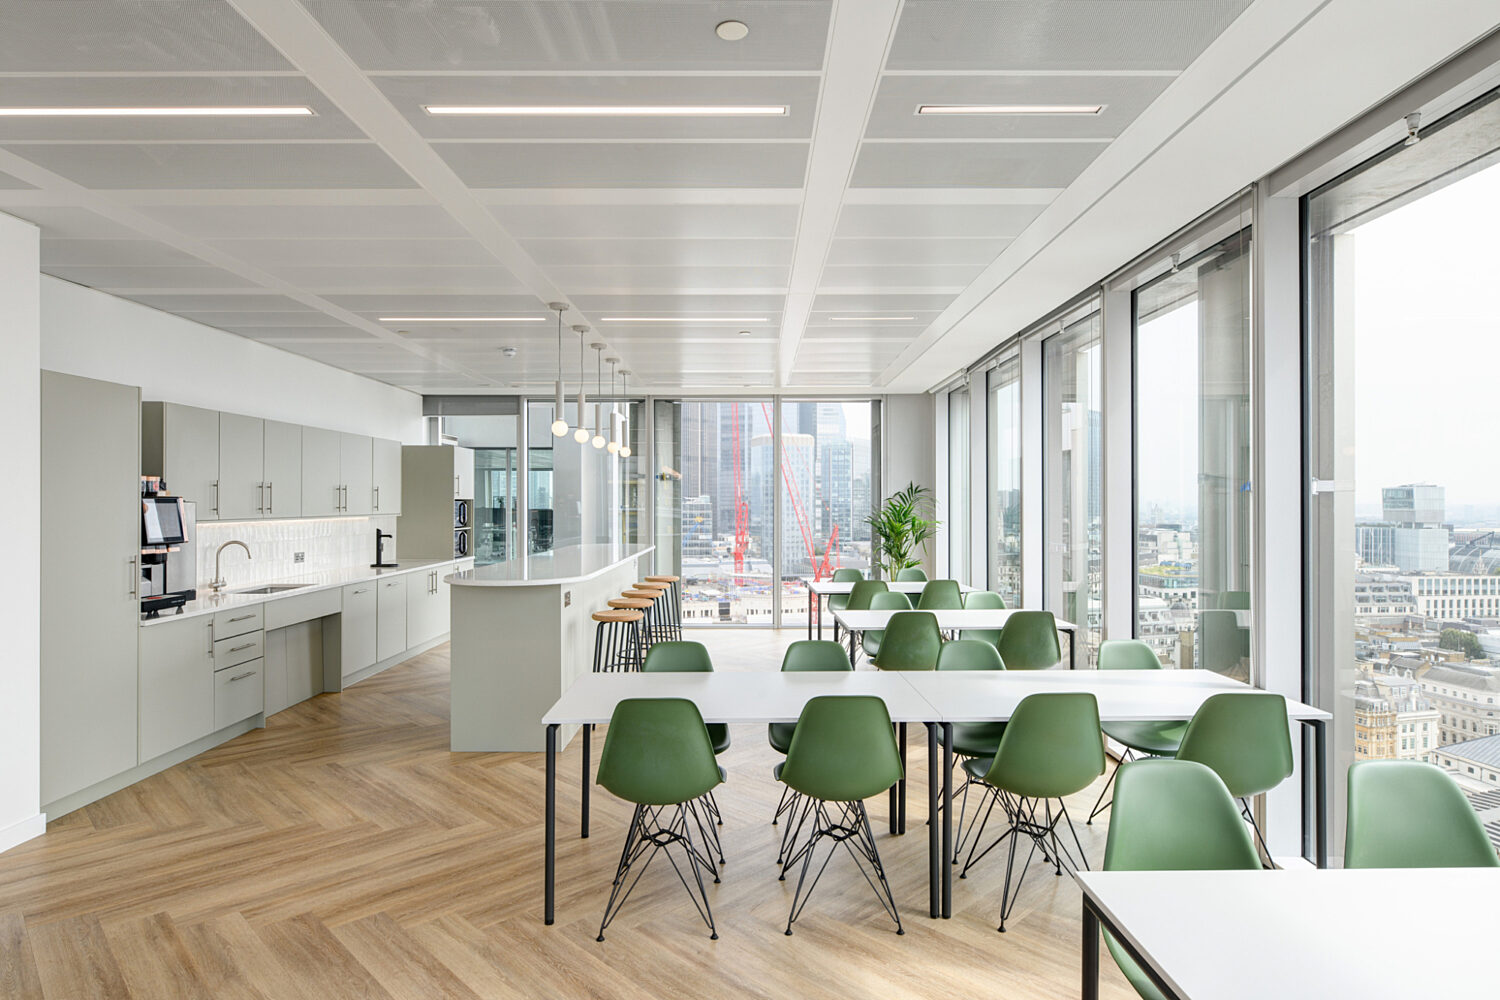 Teapoint and café style seating in London office